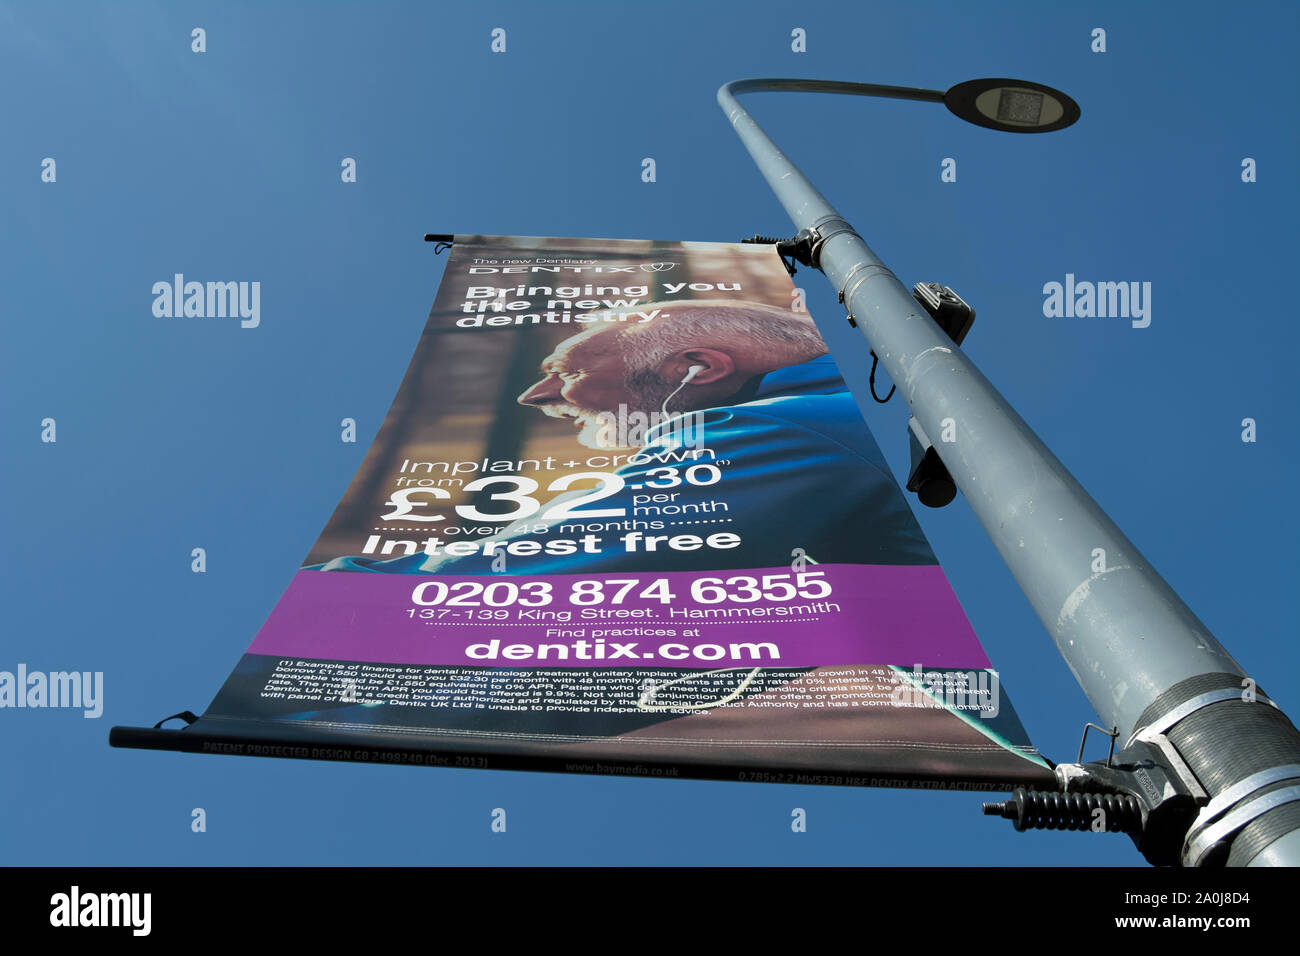 hanging banner advertisement for private dentistry company dentix, in hammersmith, london, england Stock Photo